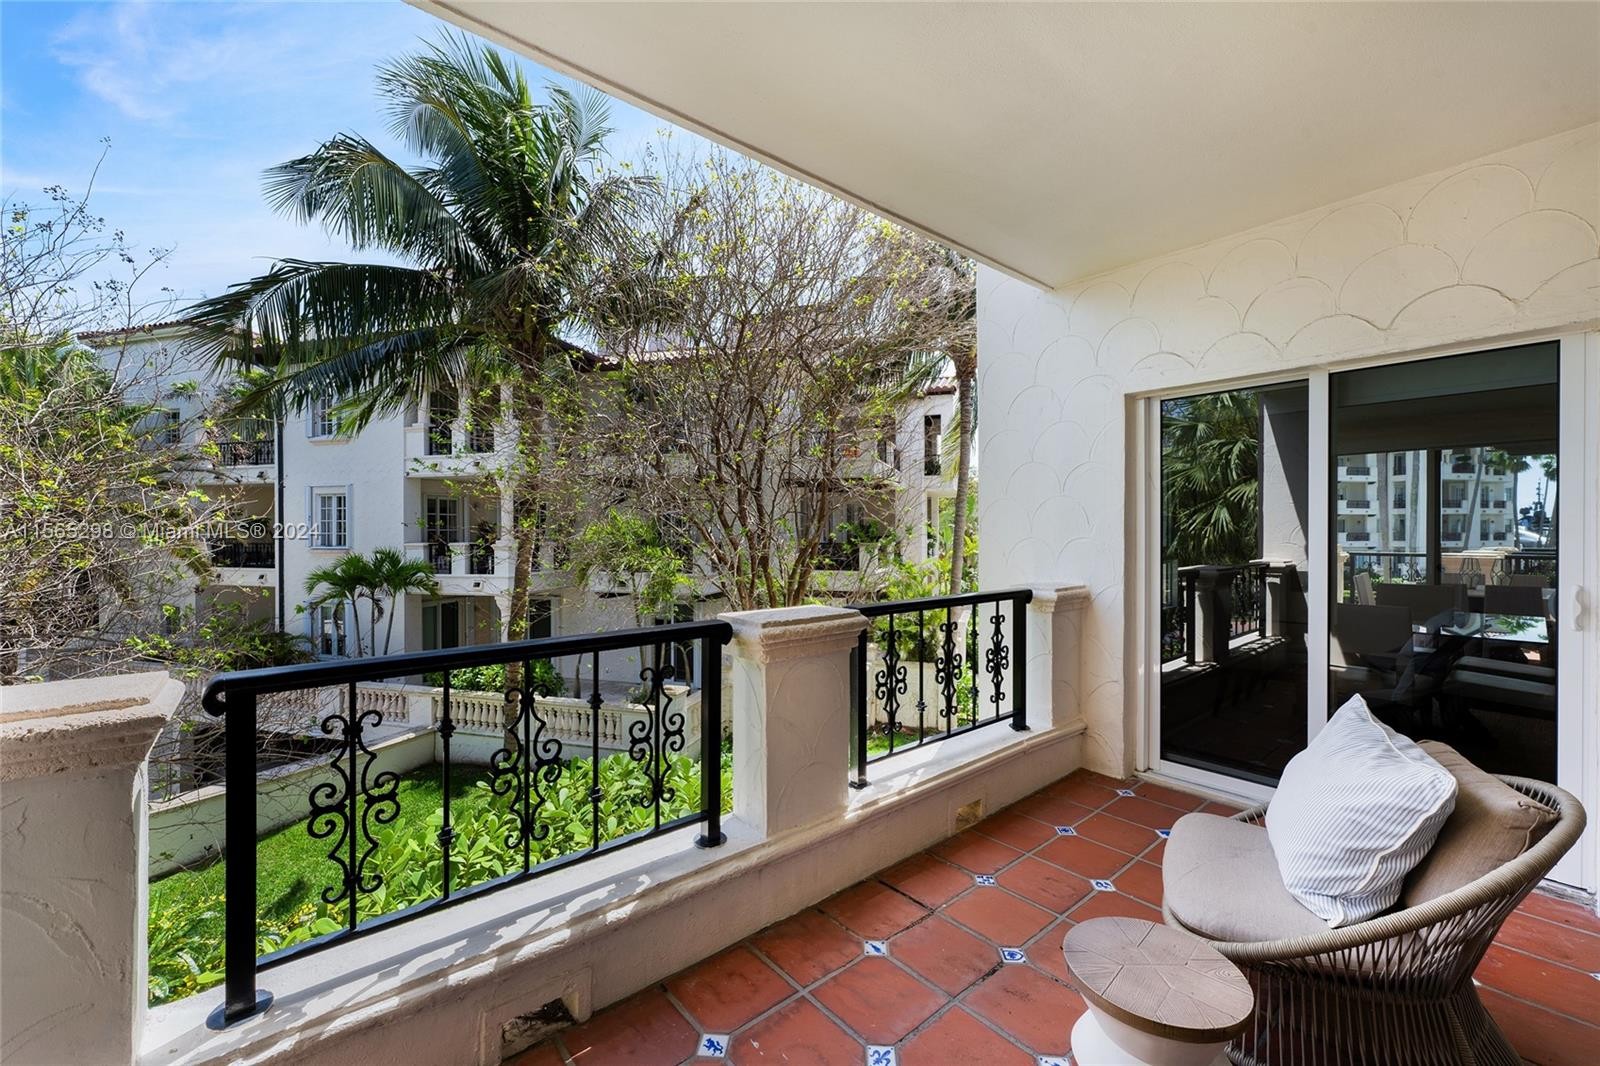 35. 2221 Fisher Island Dr